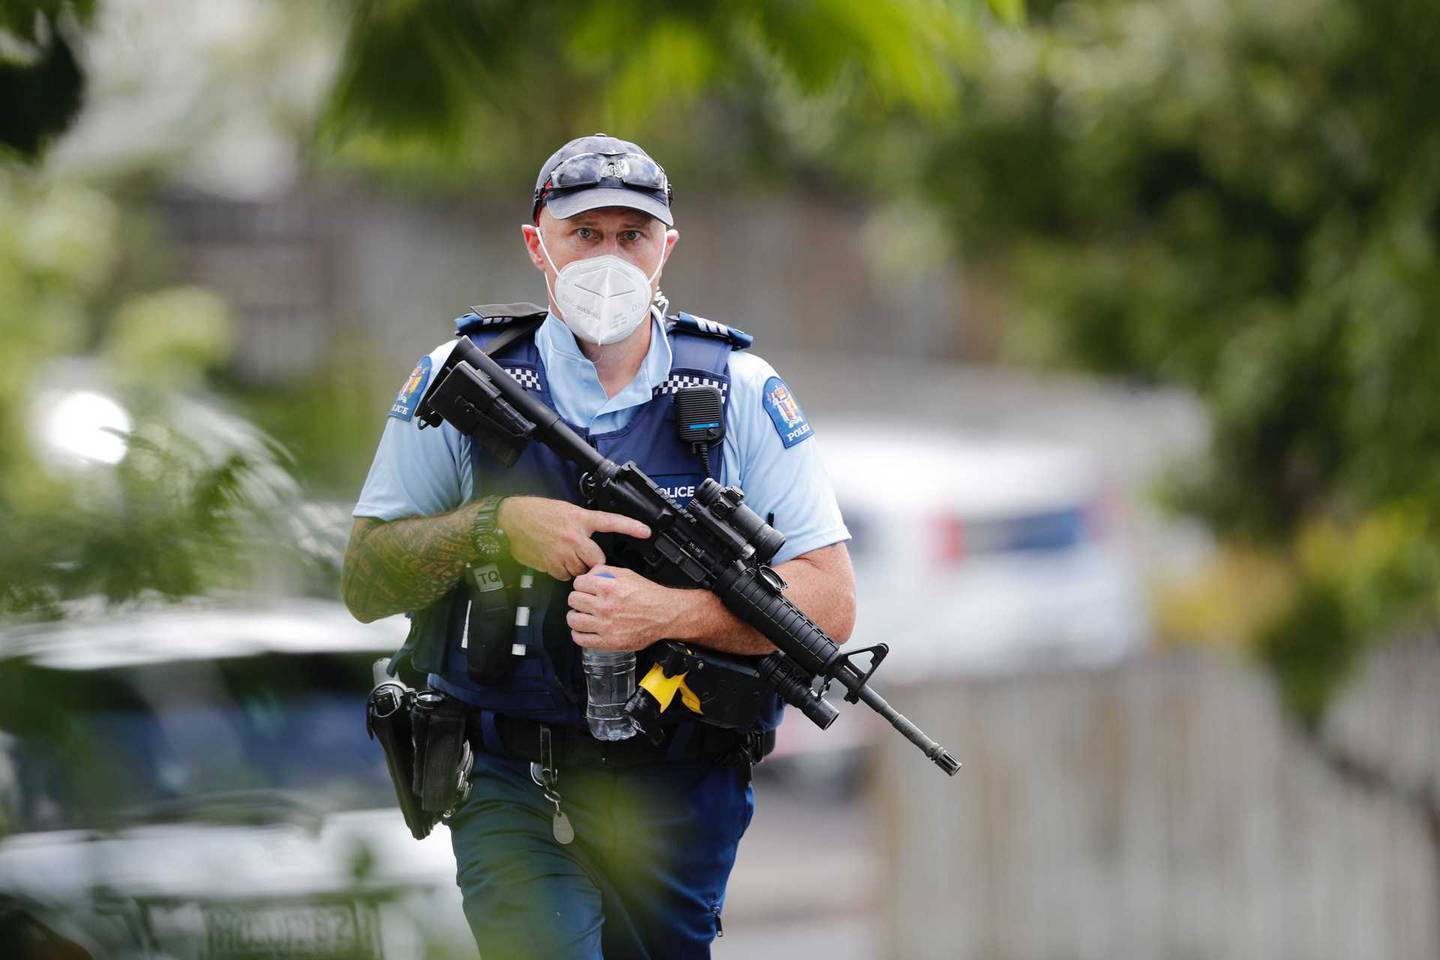 A heavy armed police presence remains in Glen Eden. Photo / Dean Purcell